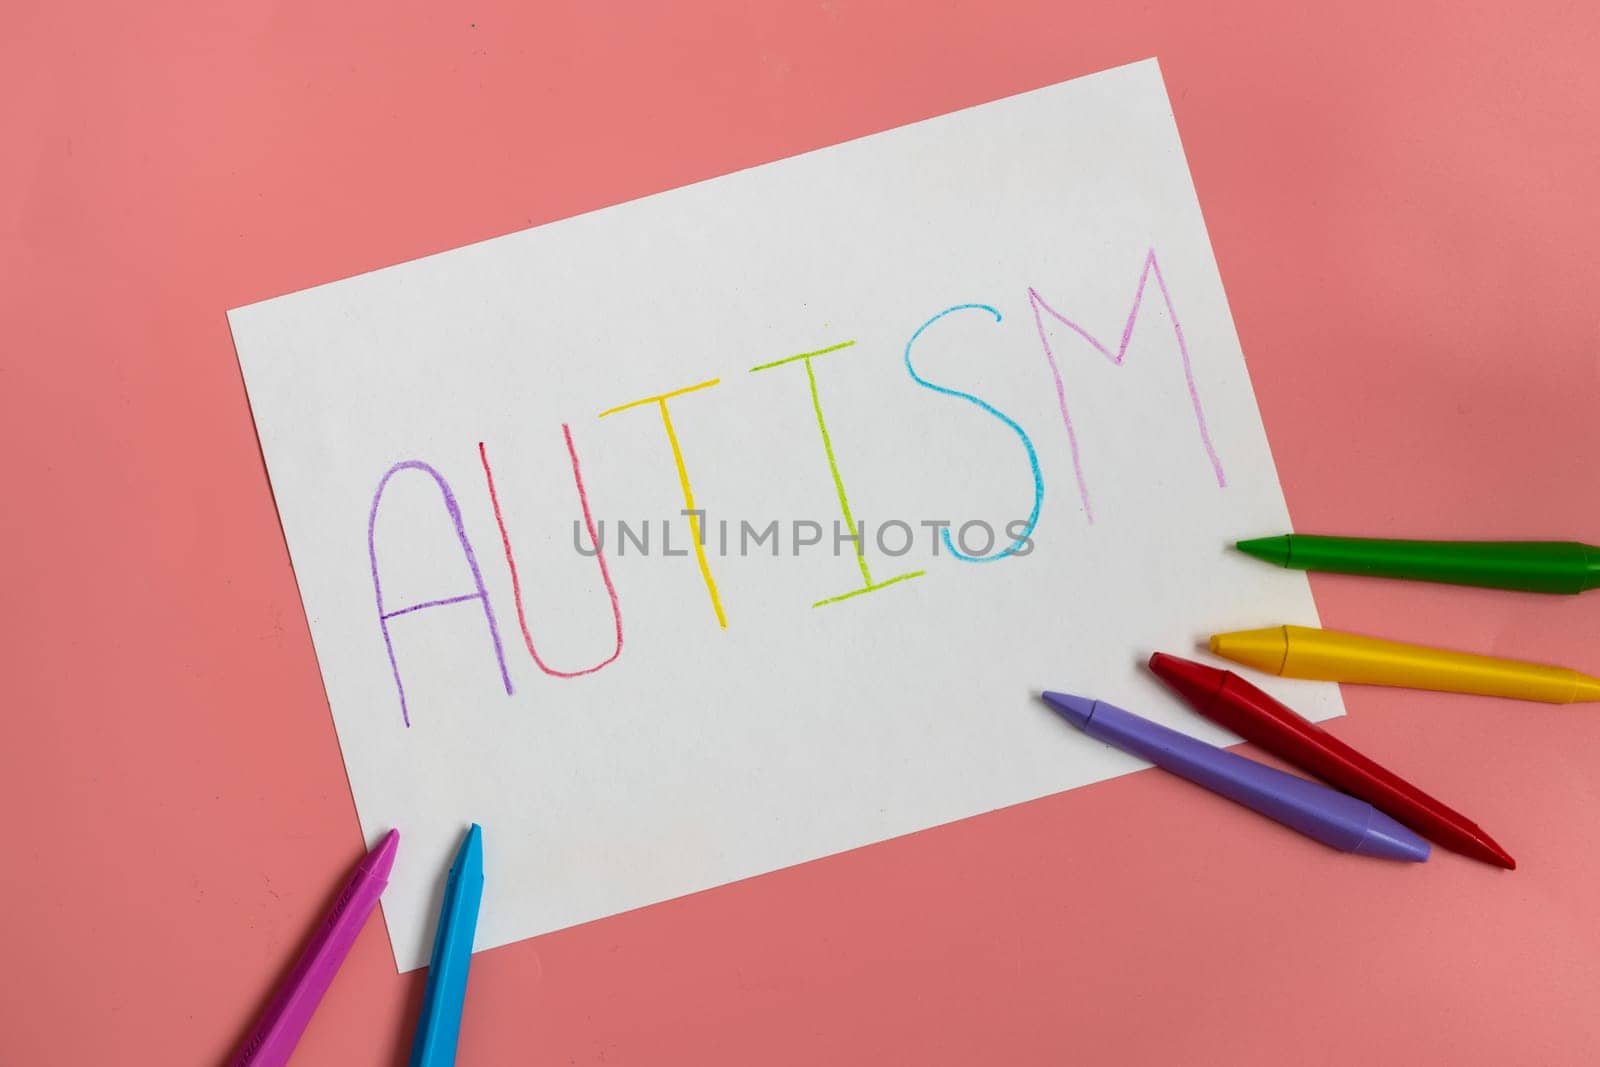 Text word autism on paper sheet written by colorful letter, on blue background